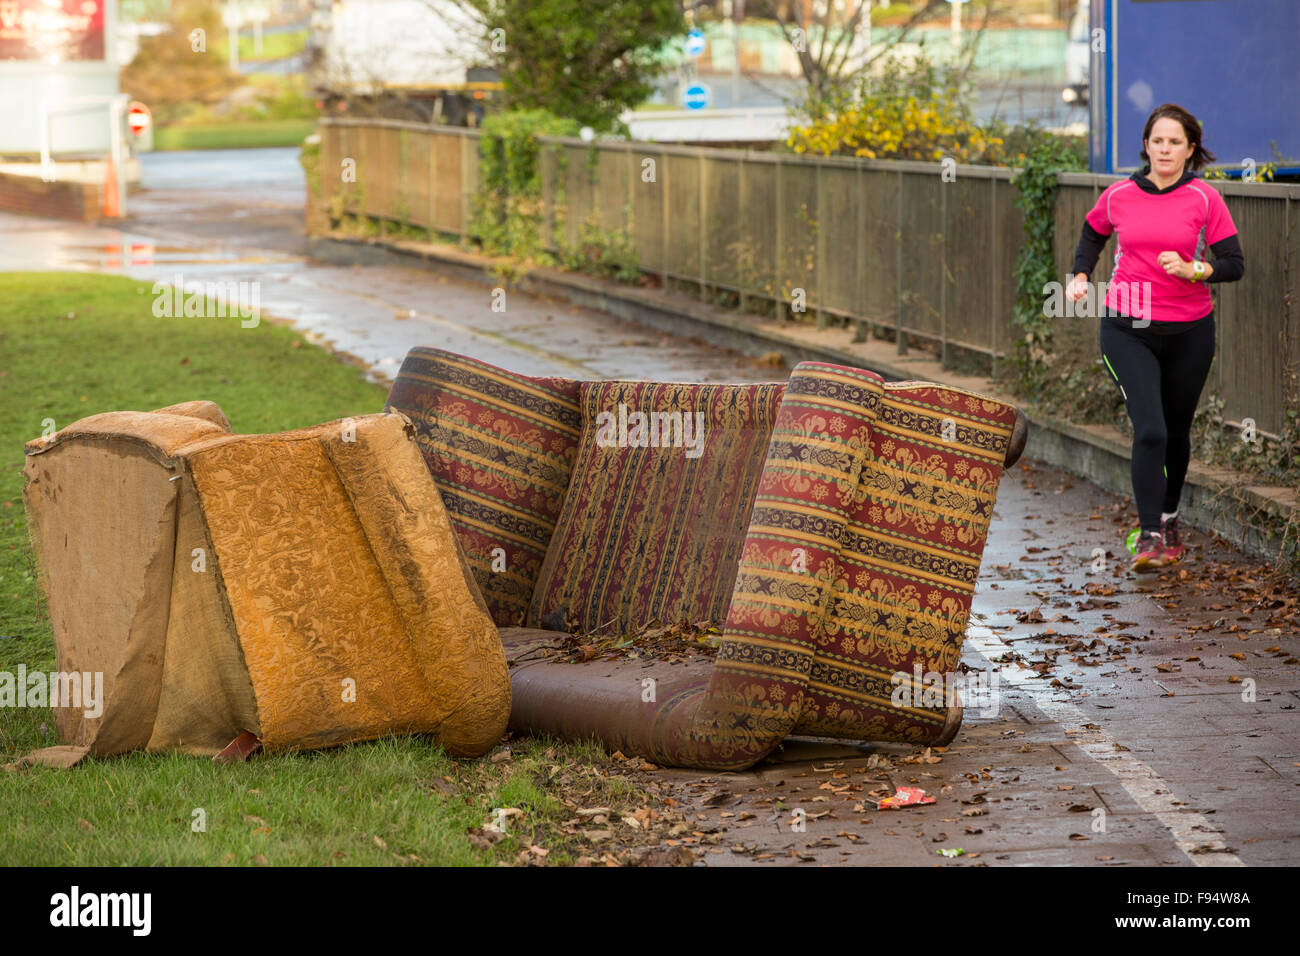 Life returns to normal. A flood damaged sofa and chair at Hardwicke Circus in Carlisle, Cumbria, with a jogger running past on Tuesday 8th December 2015, after torrential rain from storm Desmond. The storm set a new British record for rainfsll totals in a day with 341.4mm falling in 24 hours. Stock Photo